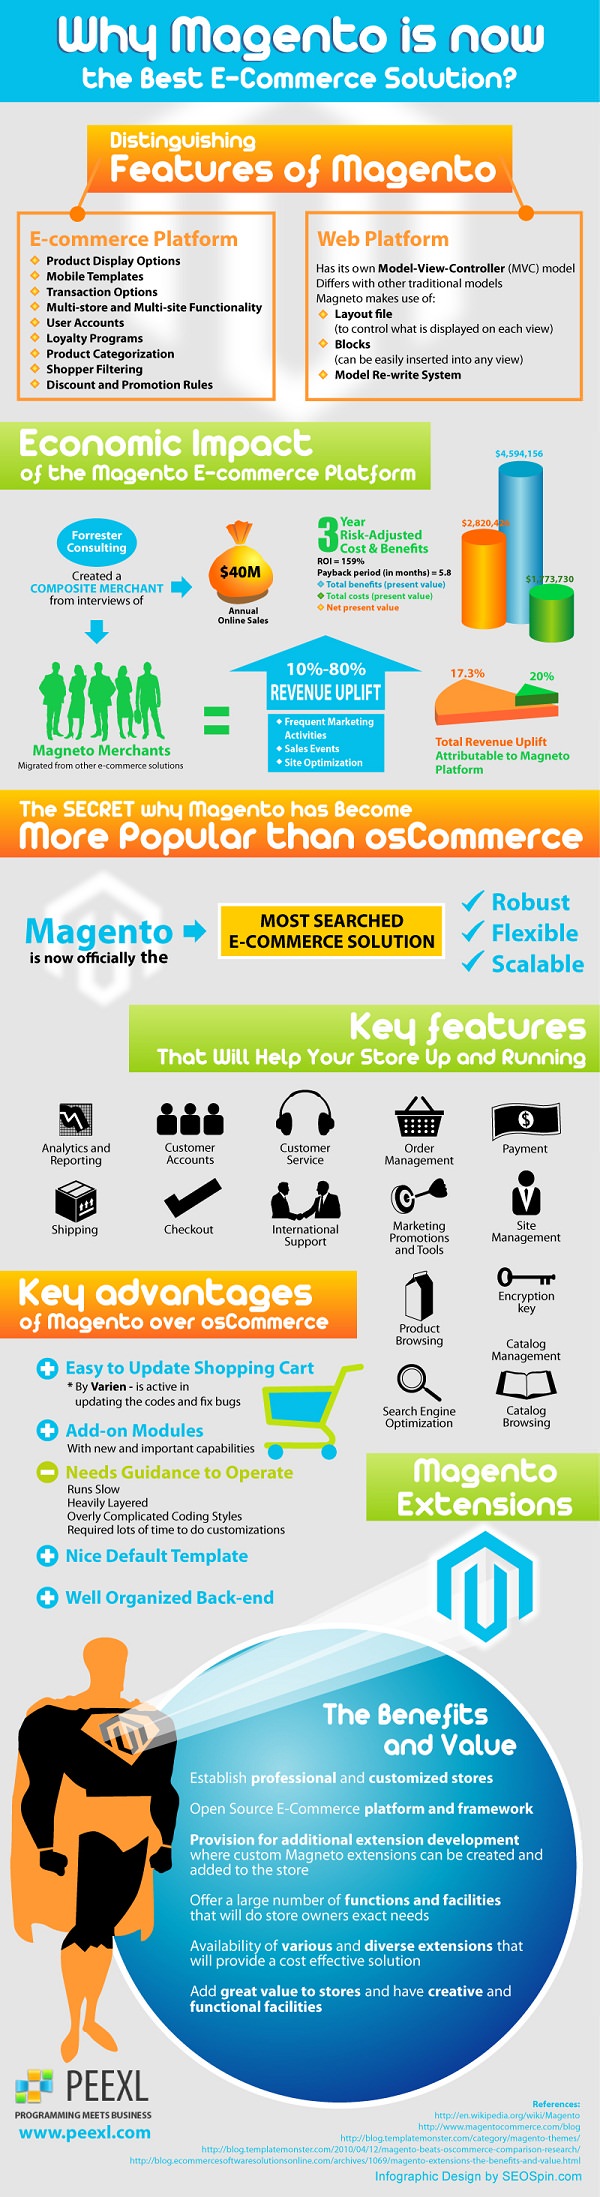 Why Magento Is Now World Leading e-Commerce Solution [Infographic]